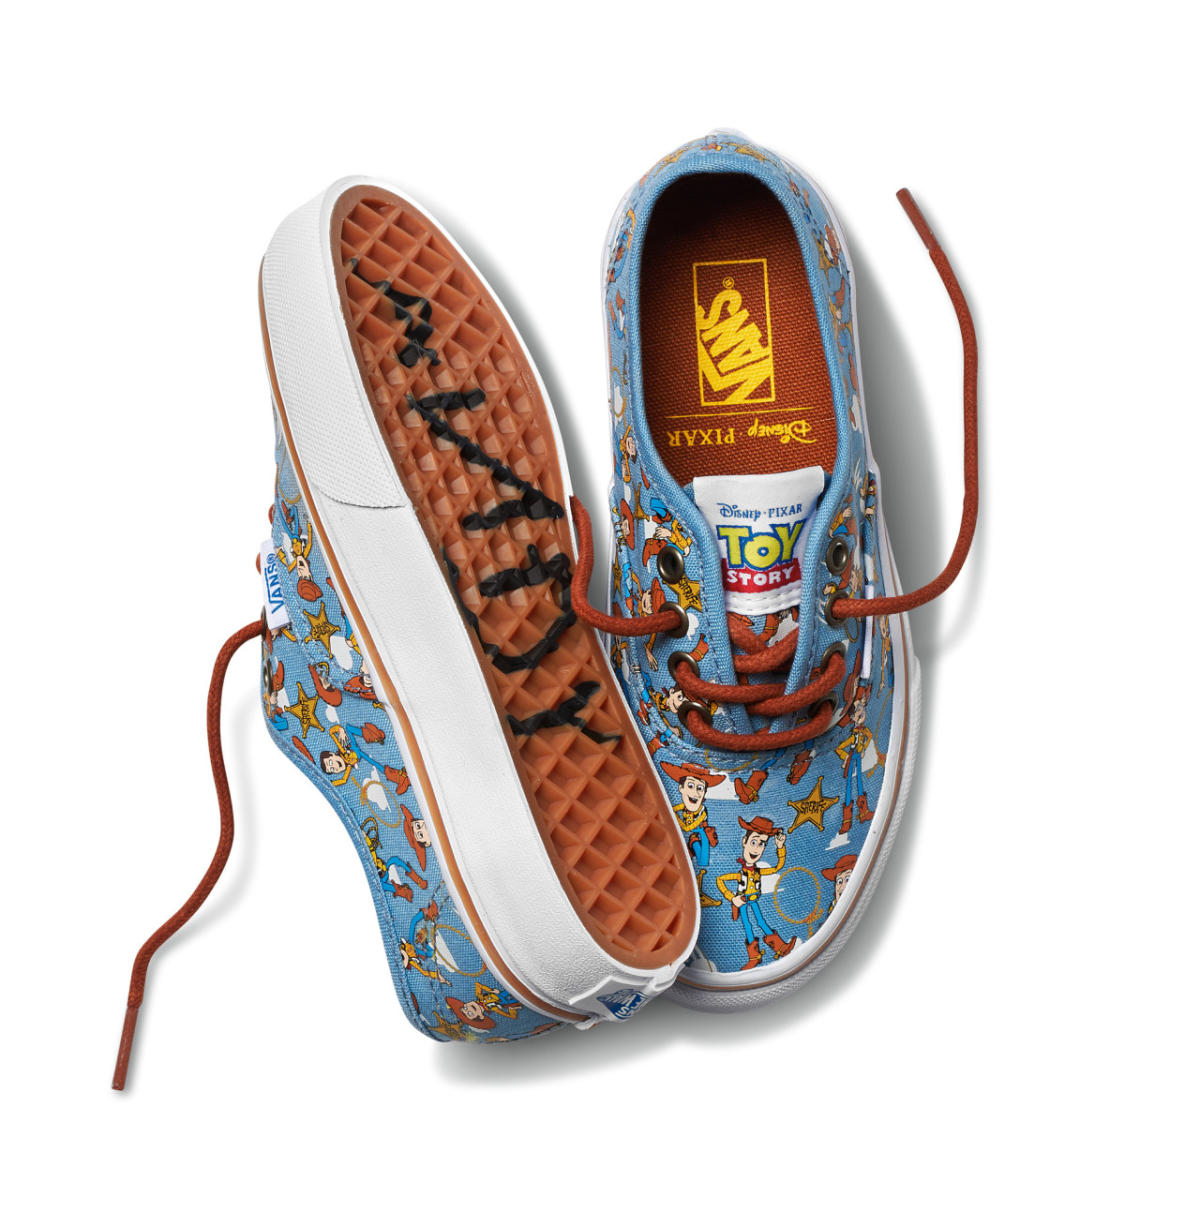 The Vans x Toy Story collaboration will take you right back to your  childhood